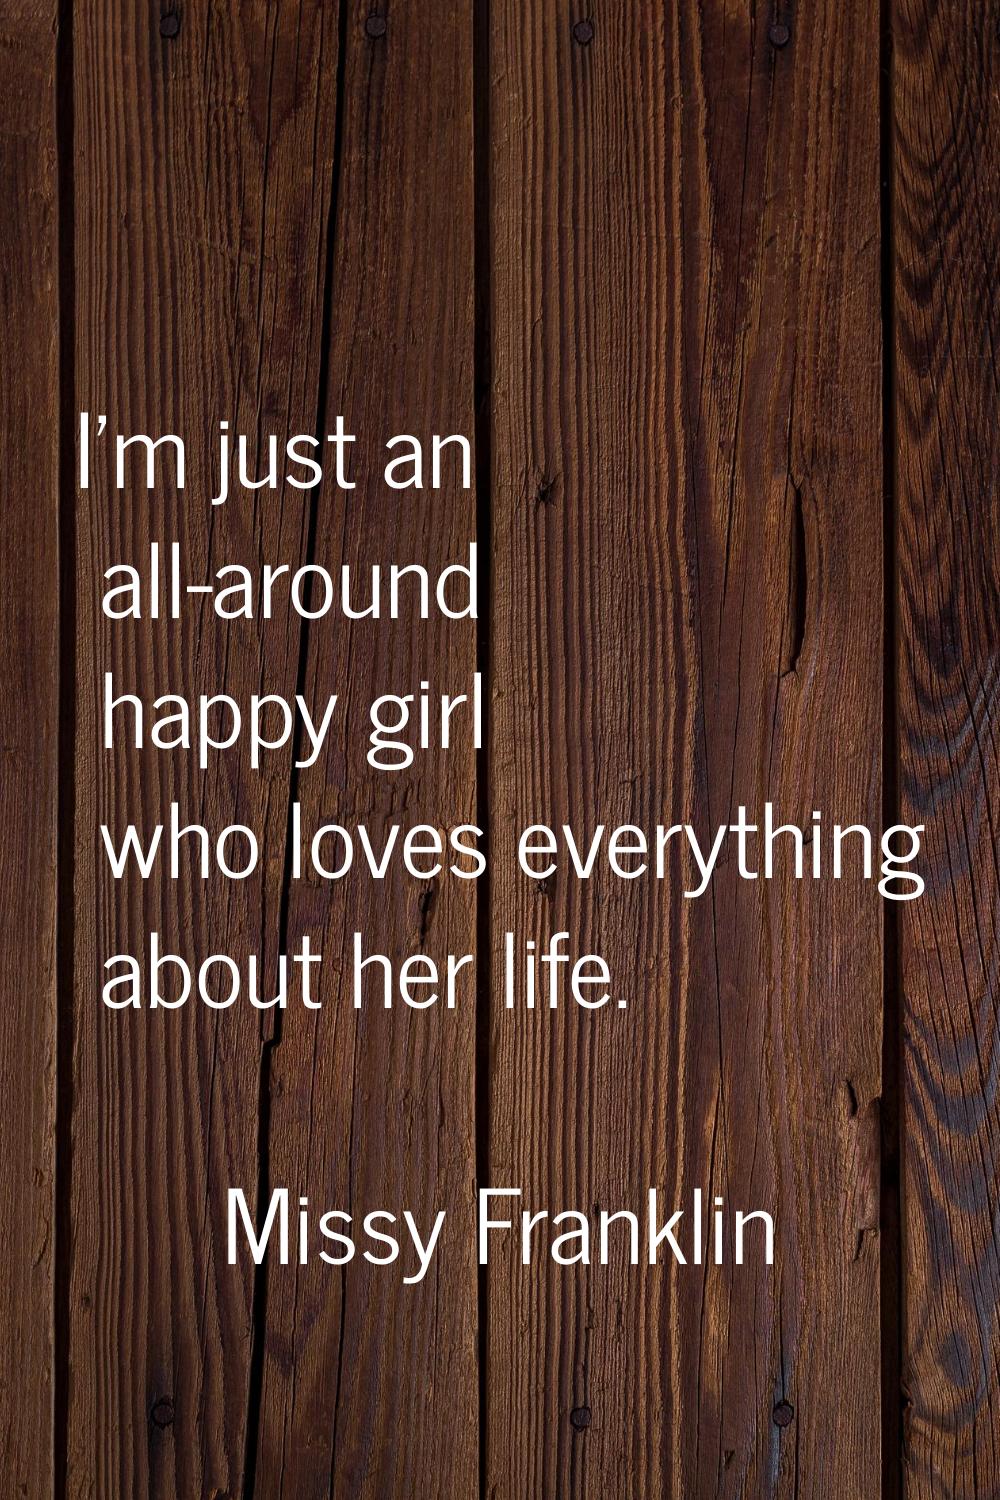 I'm just an all-around happy girl who loves everything about her life.